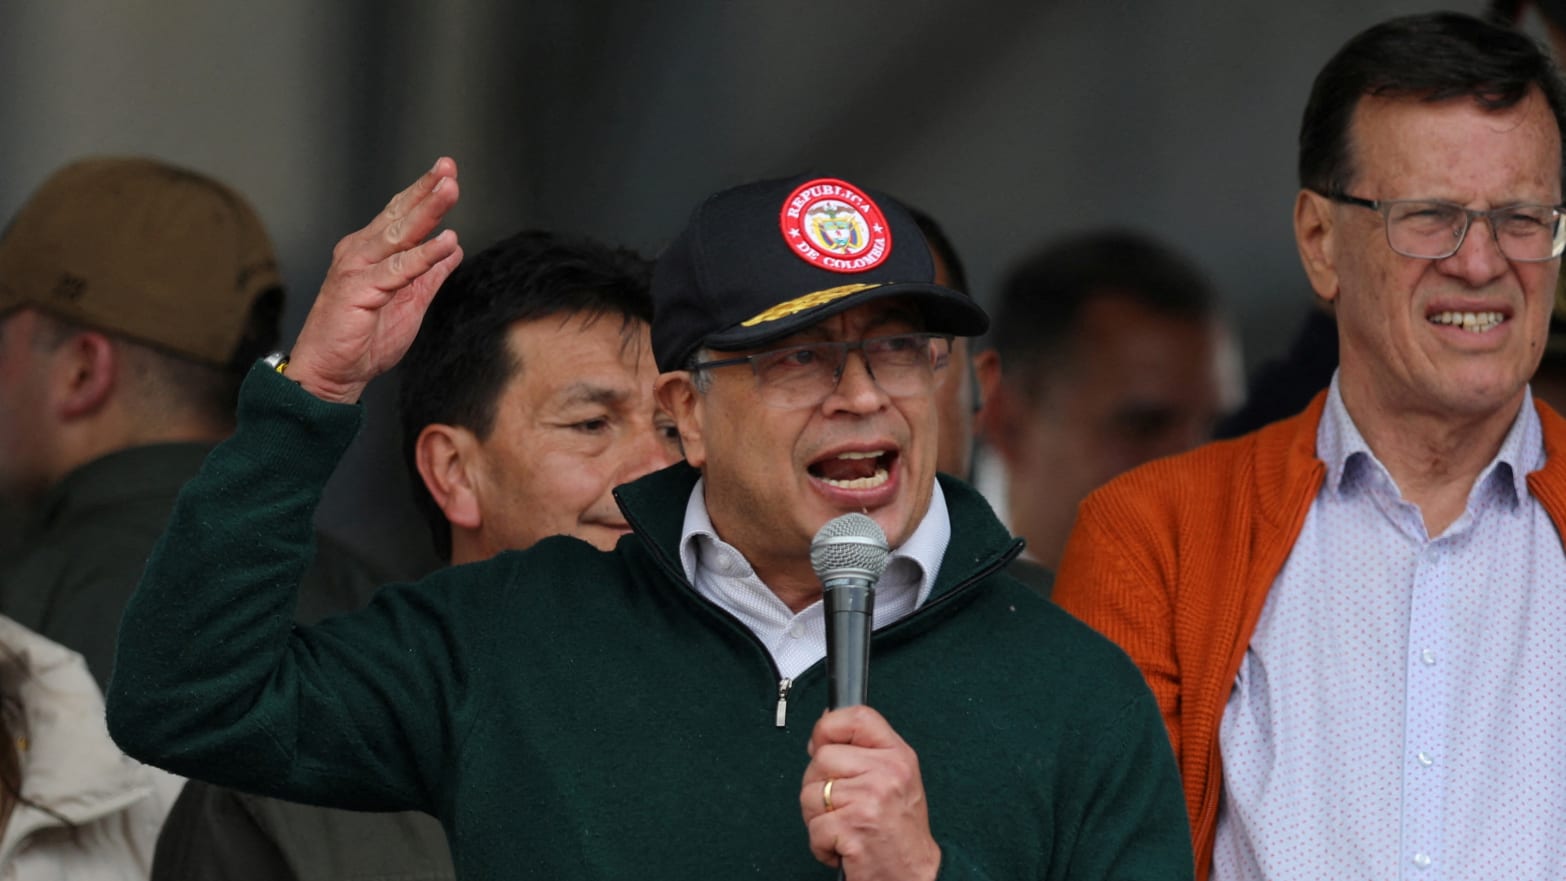 Colombia's president wearing a cap, holding a microphone, gesticulating